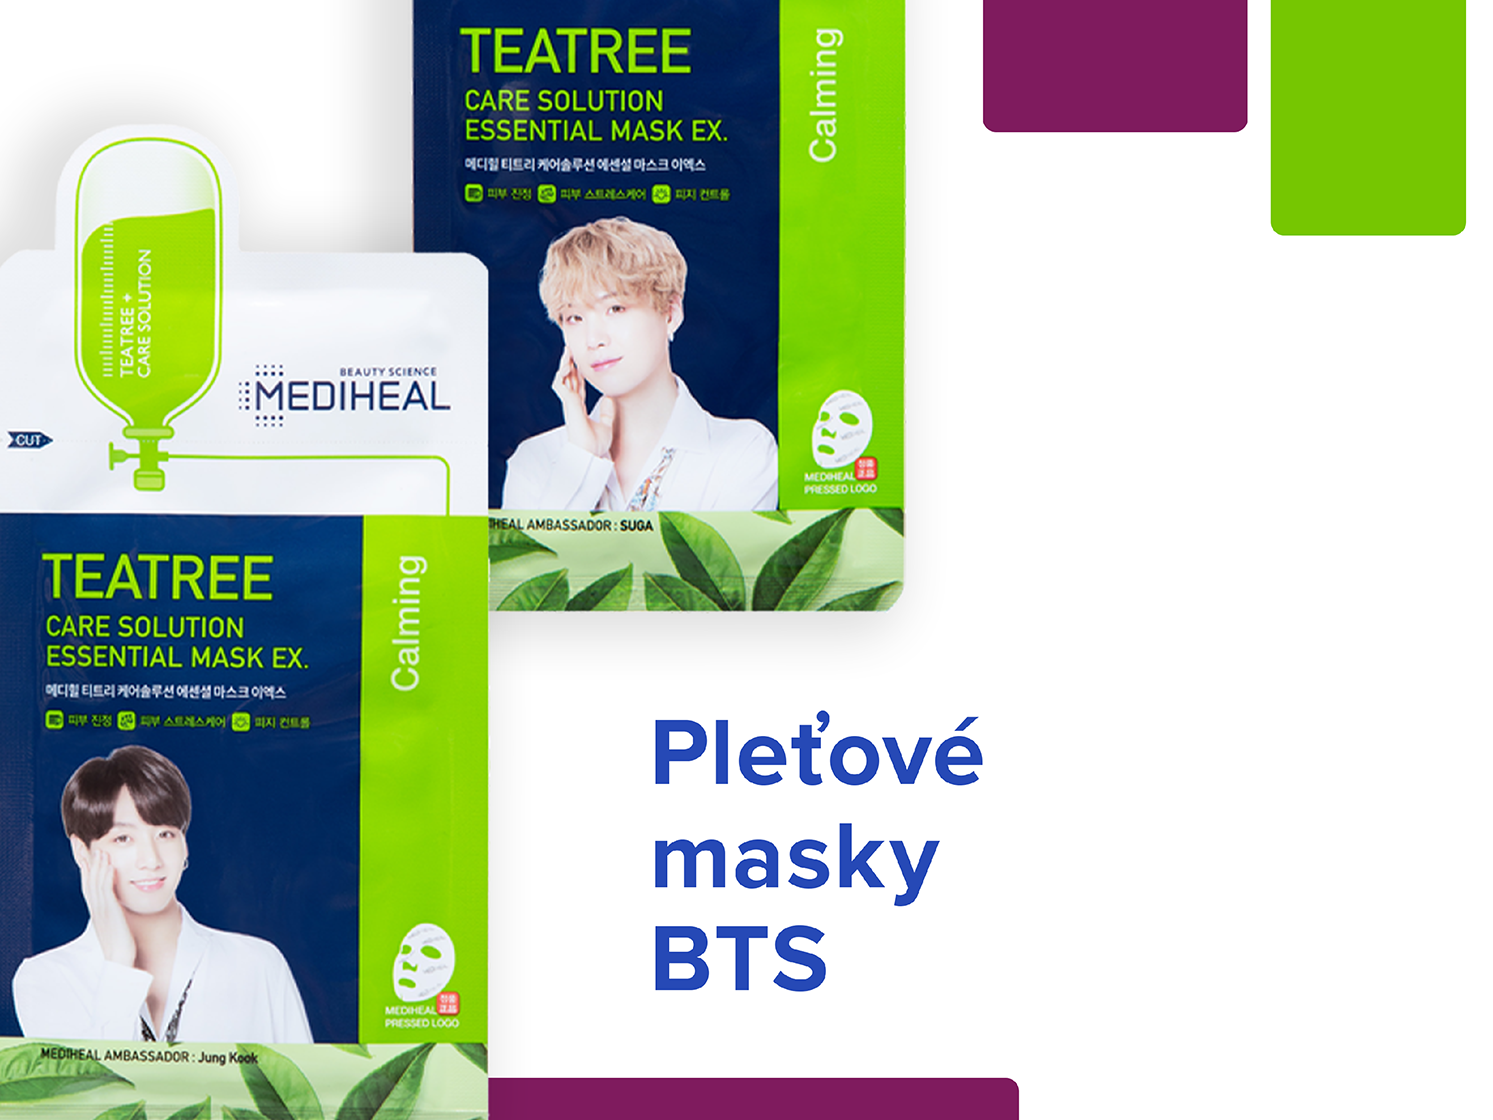 mediheal_products